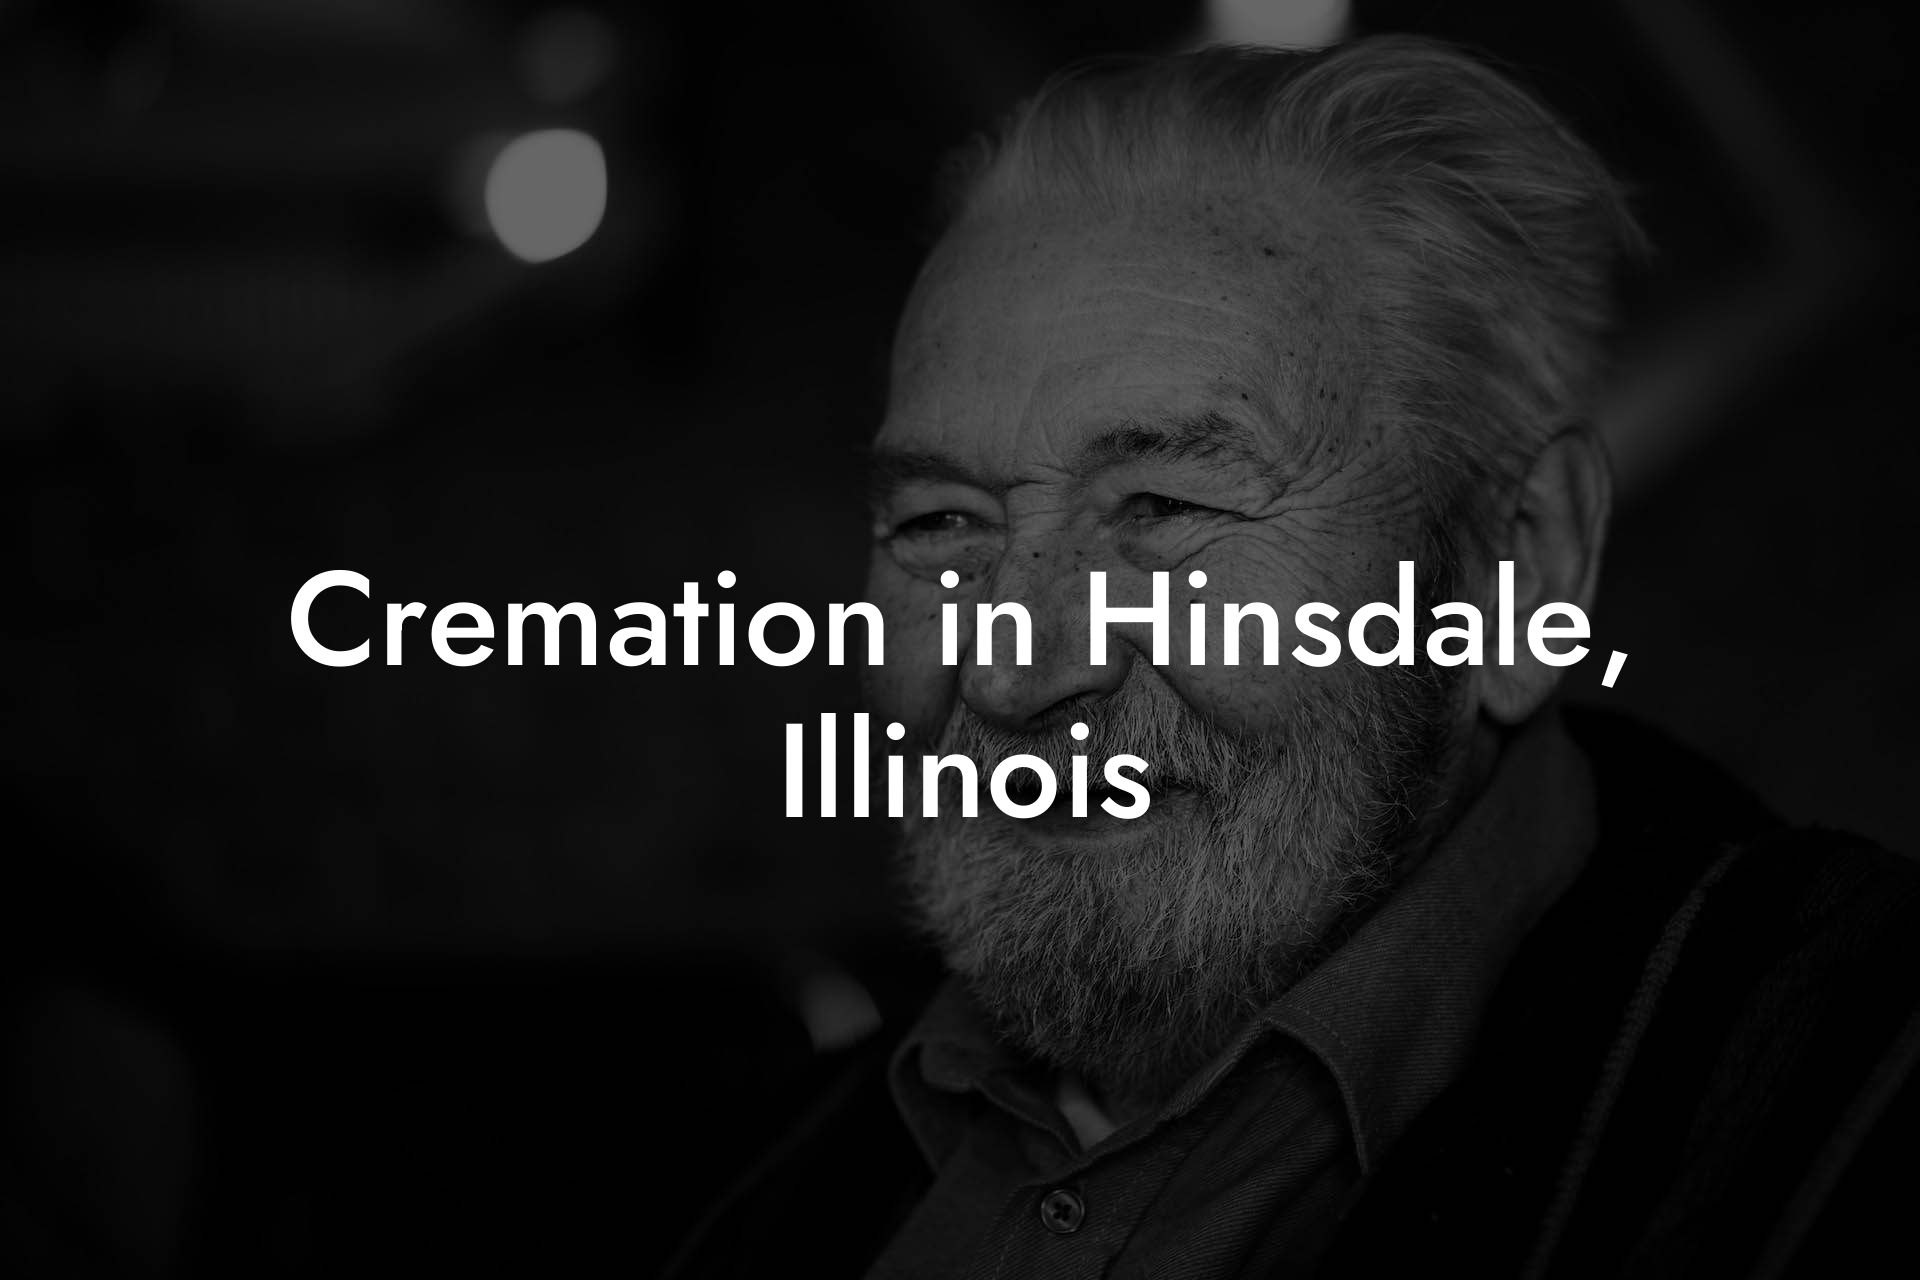 Cremation in Hinsdale, Illinois